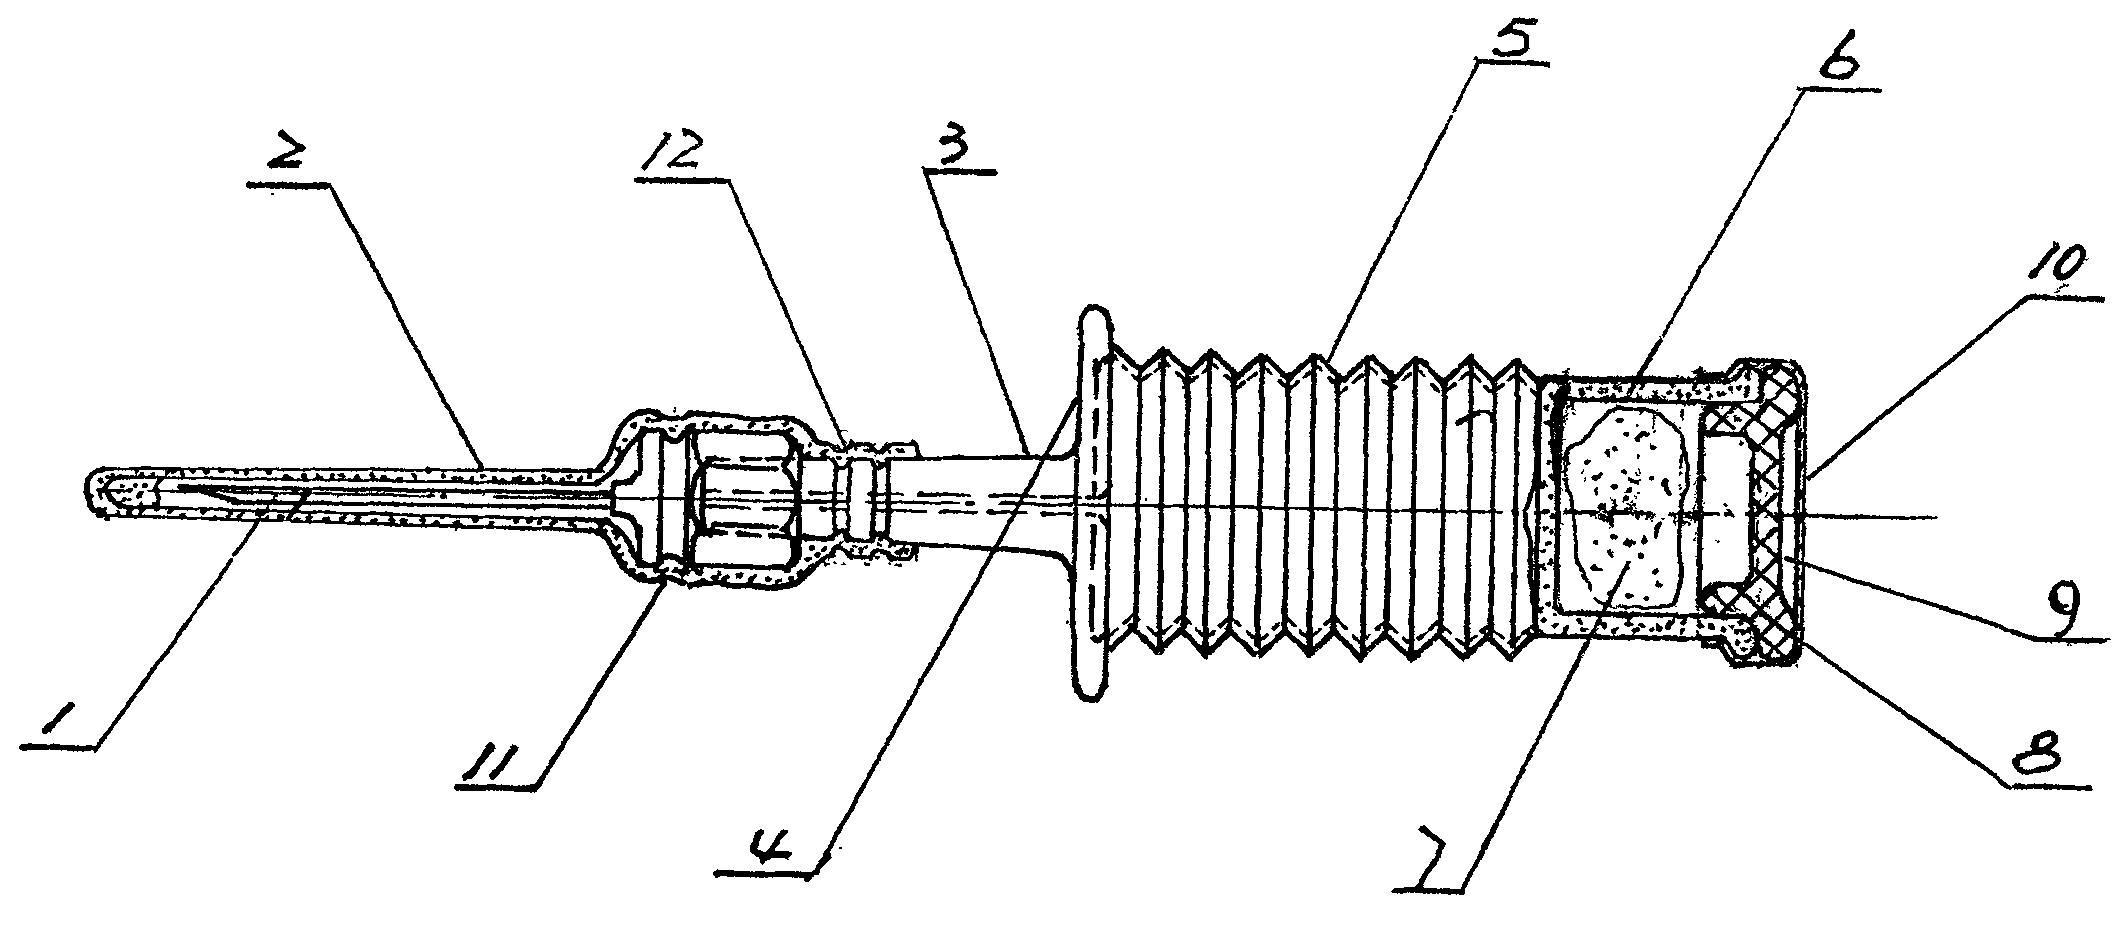 Integrated injector